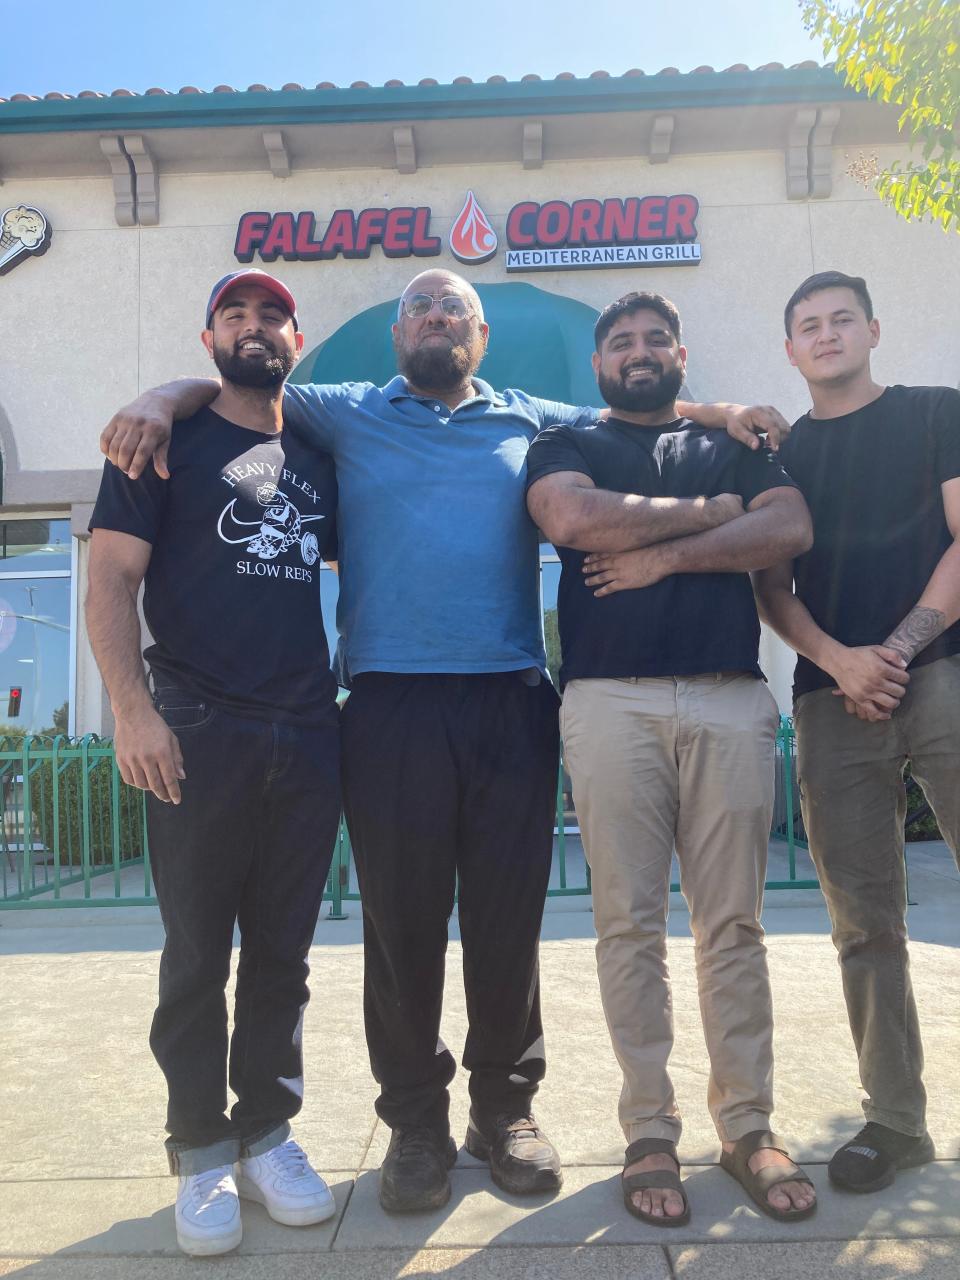 Grand opening: Left to right, Mohamed "Zeb" Shahzaib, Sajad Shakoor, Mohamad Sikandar and Eric Anguiano stand in front of the new Falafel Corner in Discovery Village in Redding.